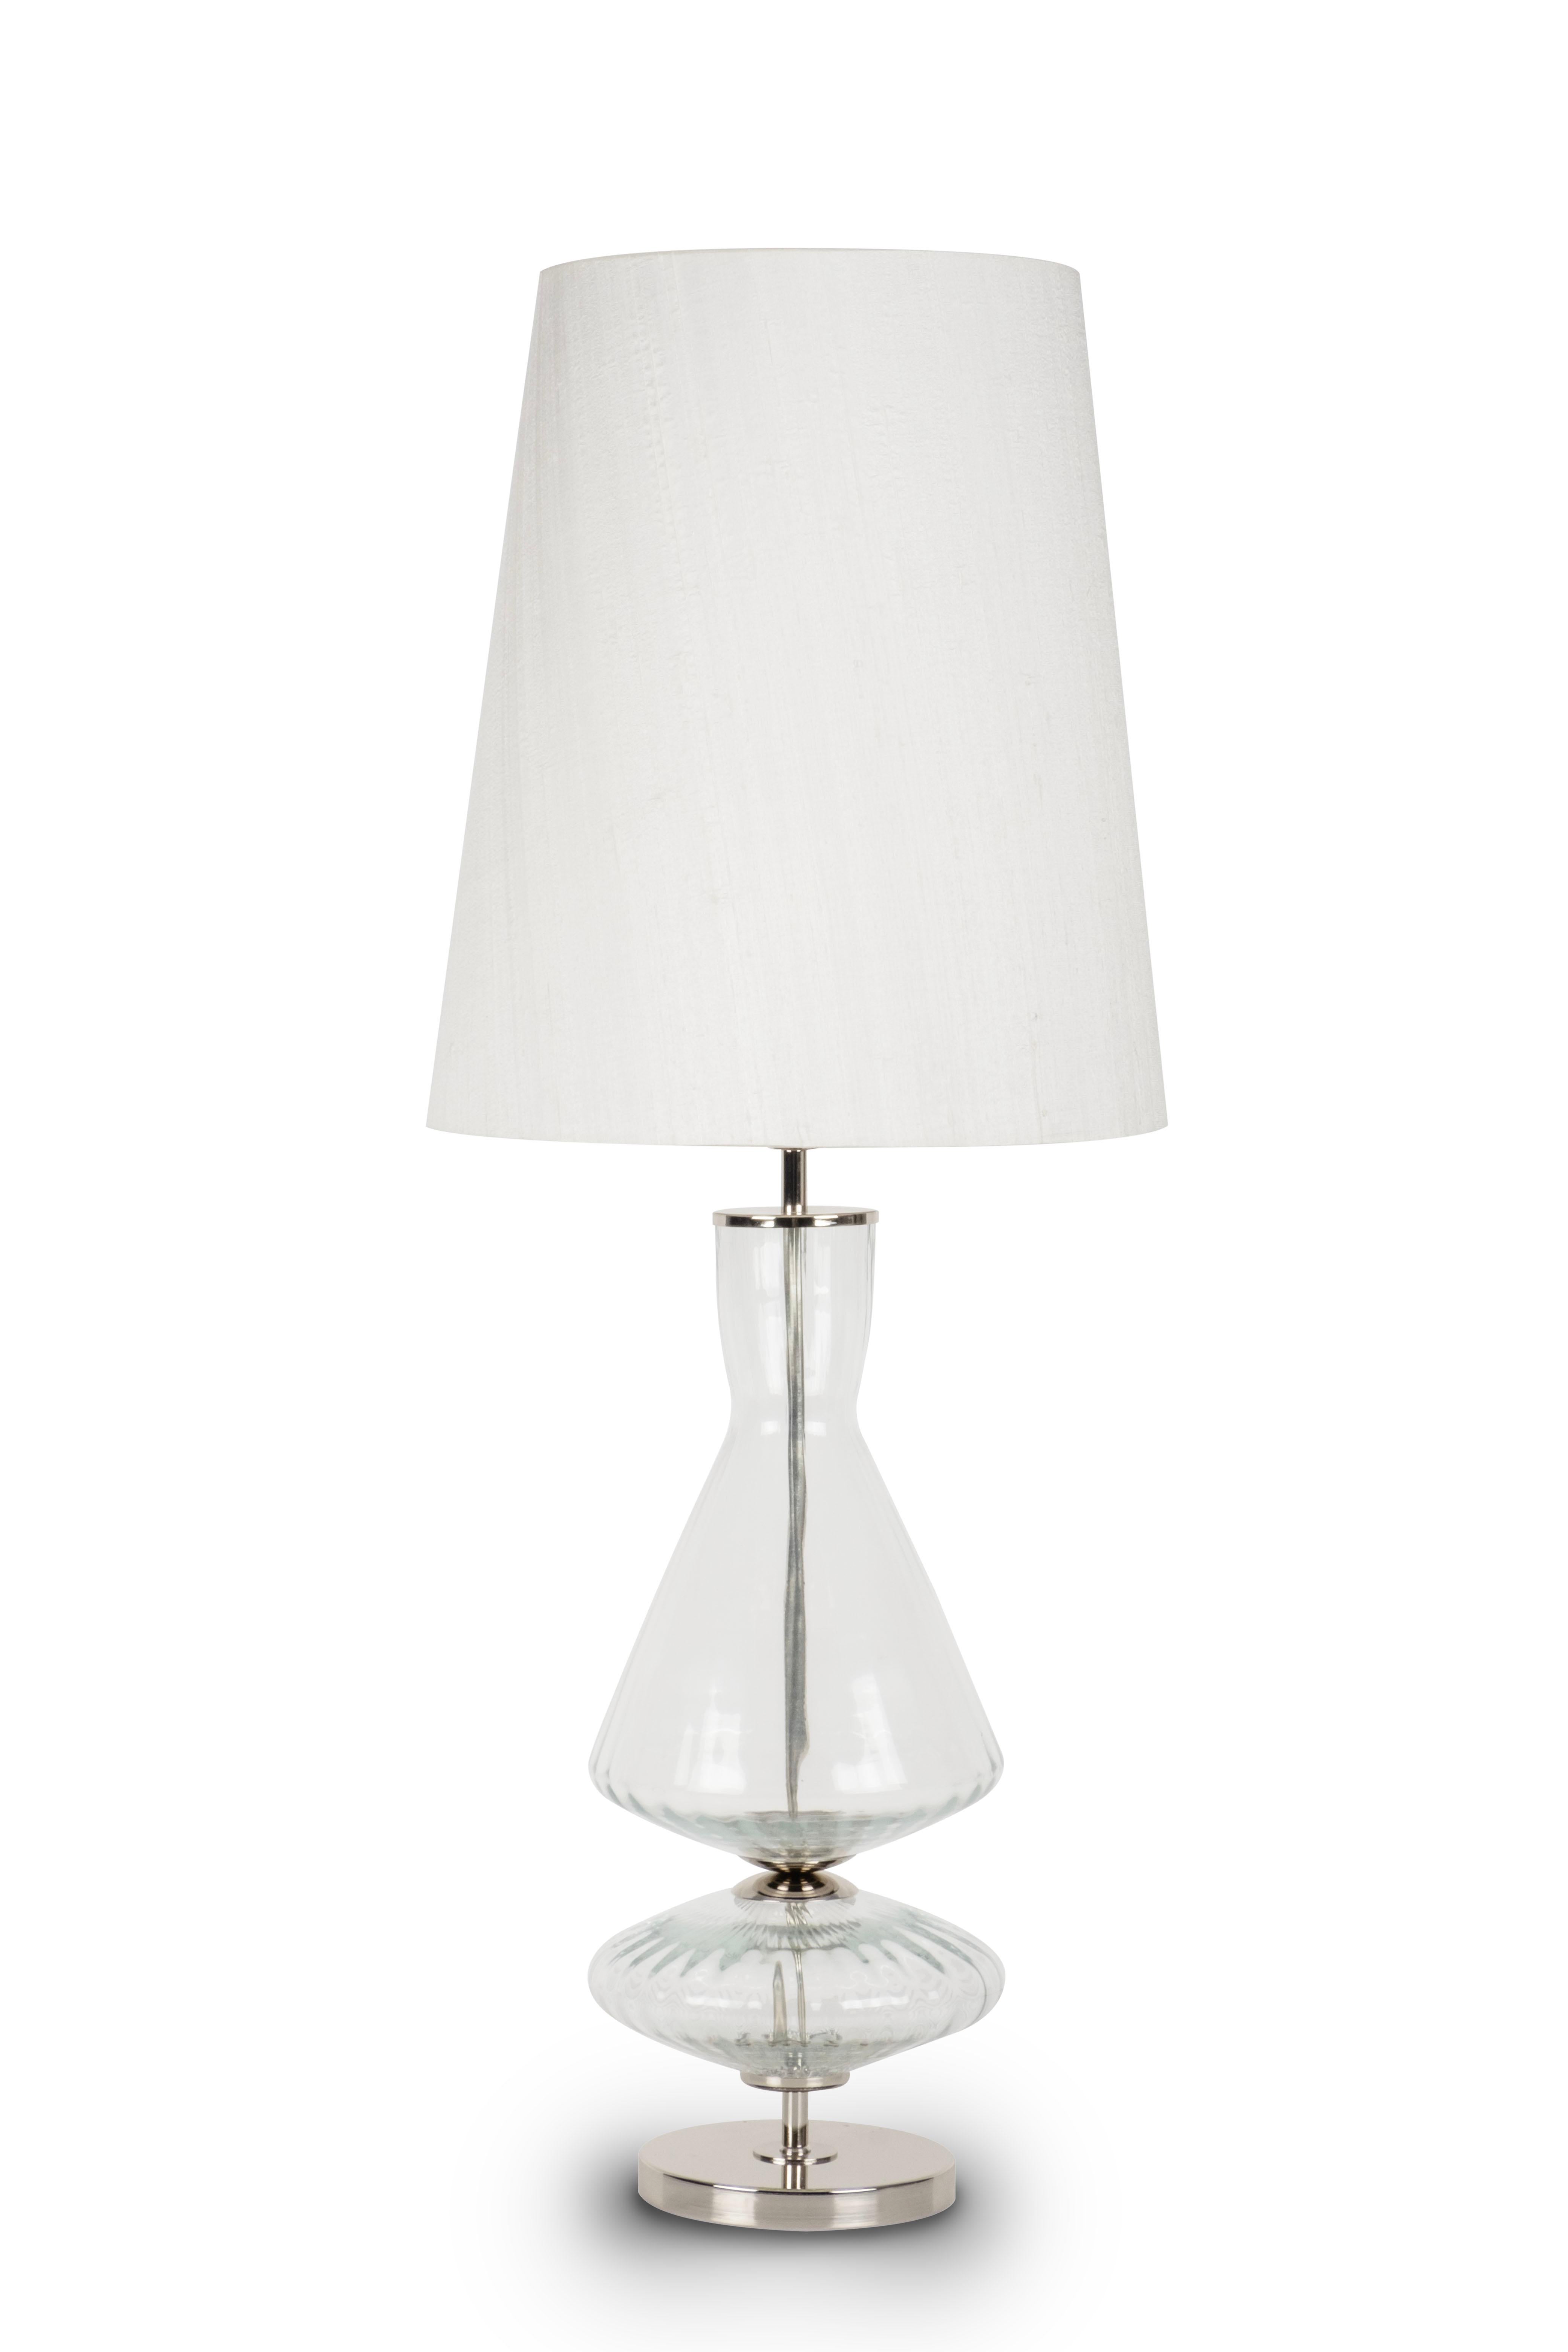 Contemporary Set/2 Modern Table Lamps, Glass Base, Silk Lampshade, Handmade by Greenapple For Sale